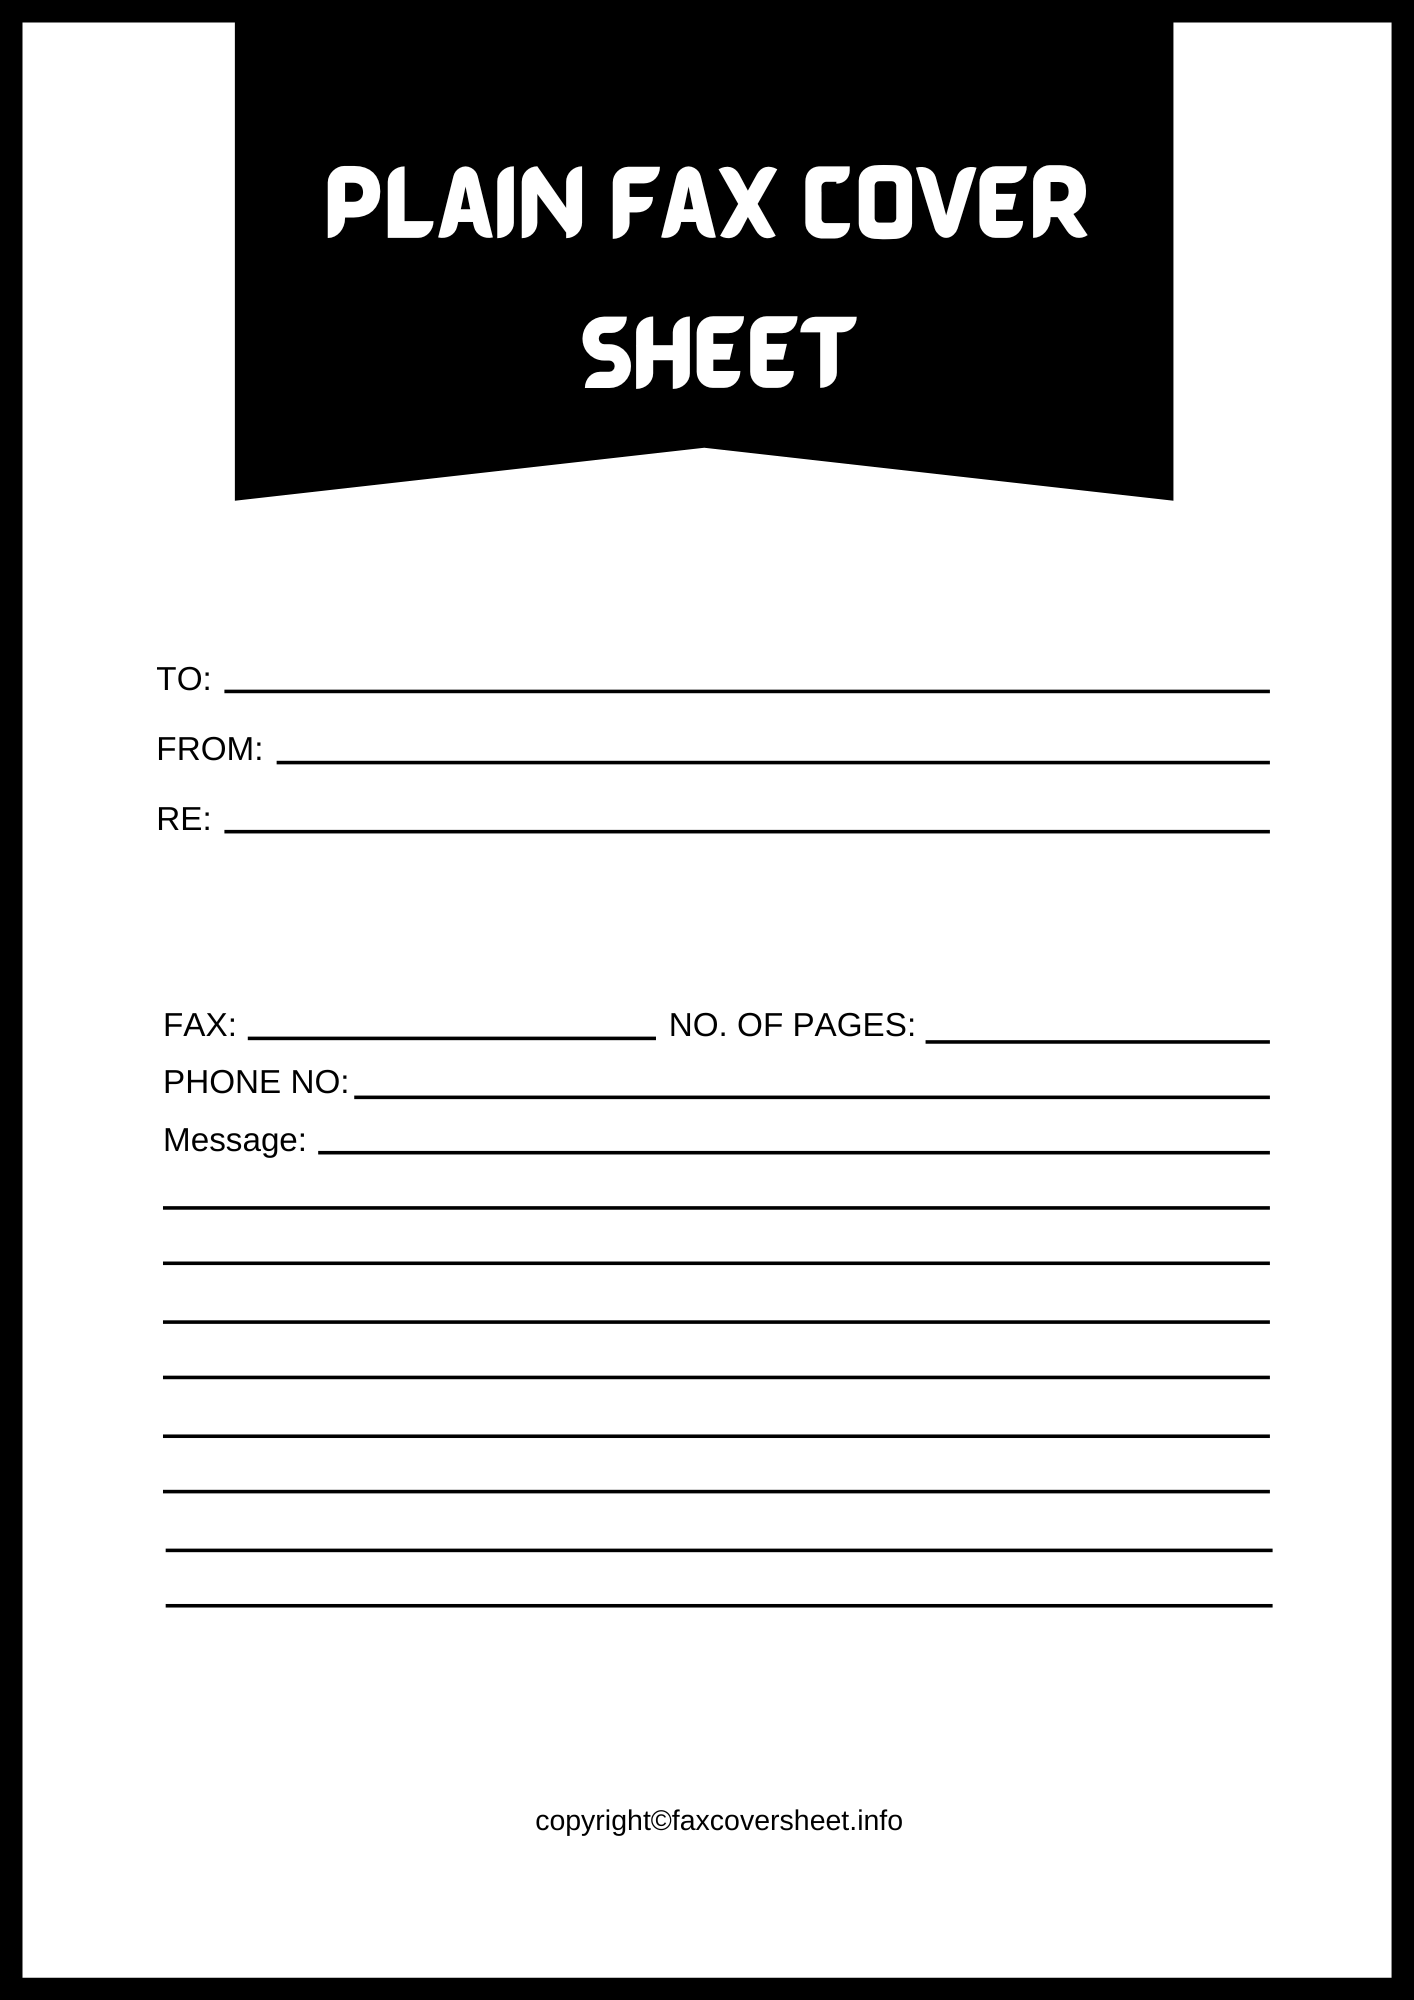 Plain Fax Cover Sheet Templates Printable in PDF & Word